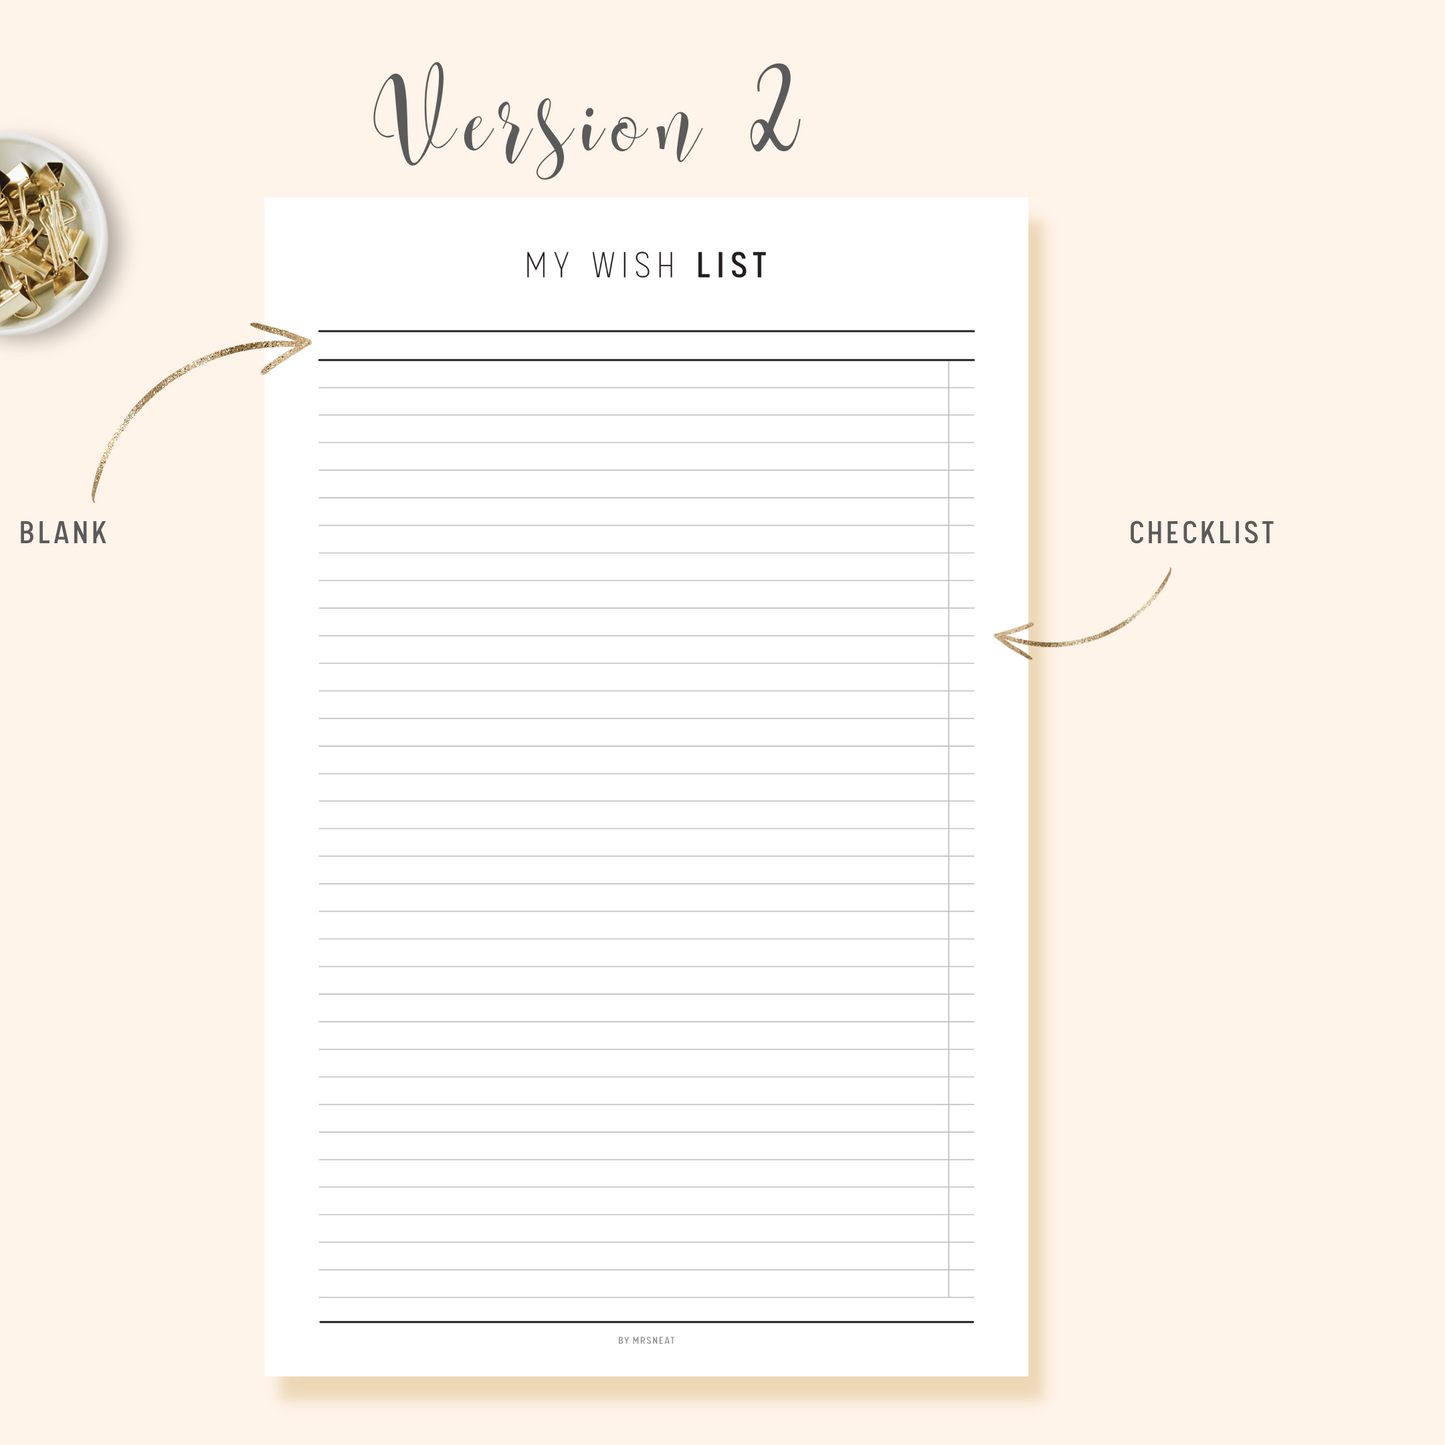 Wish List Planner with room for any with list and checklist column